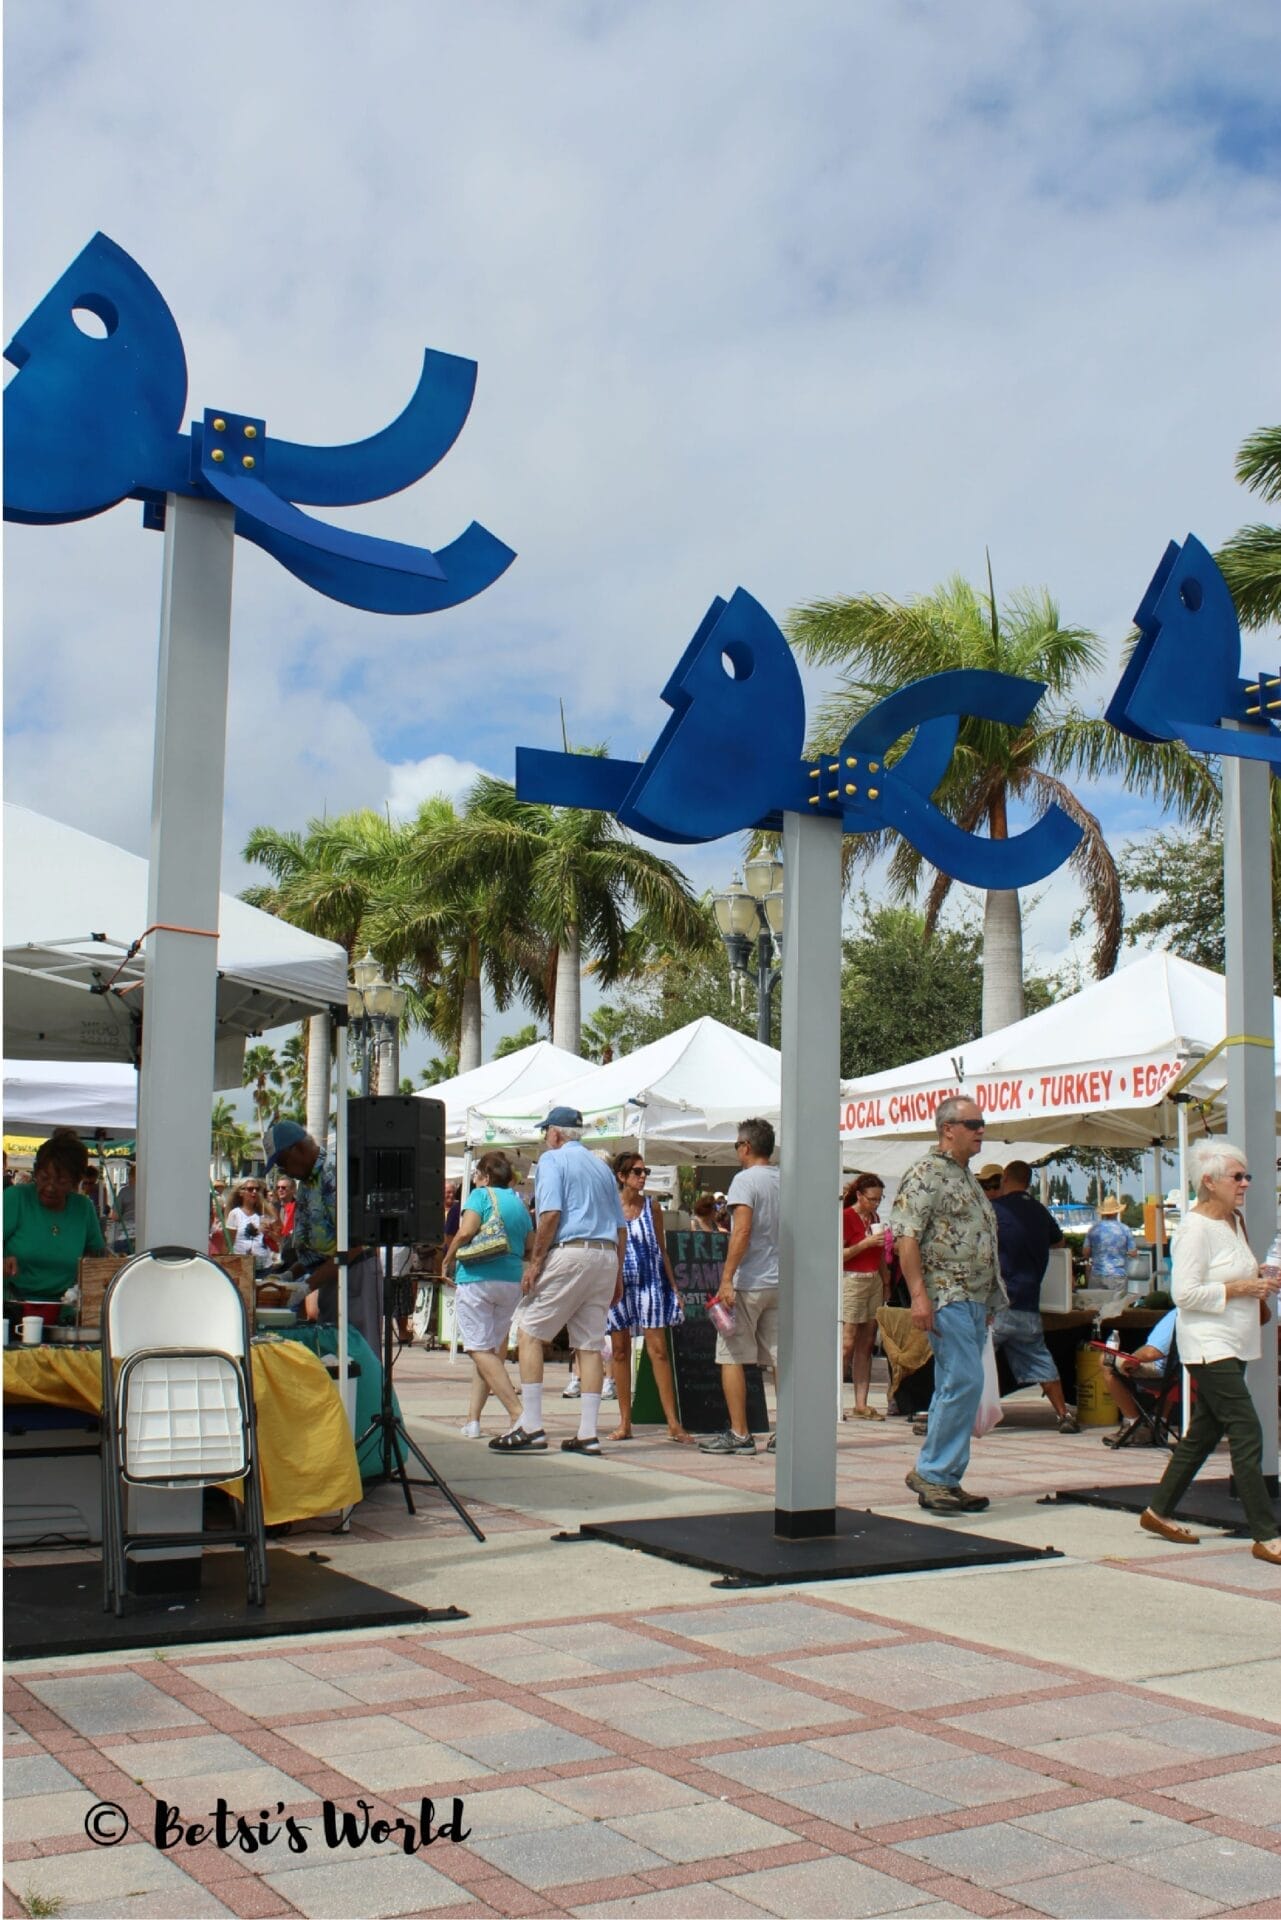 A farmers market in Fort Pierce with many people and tent stands and art sculptures.